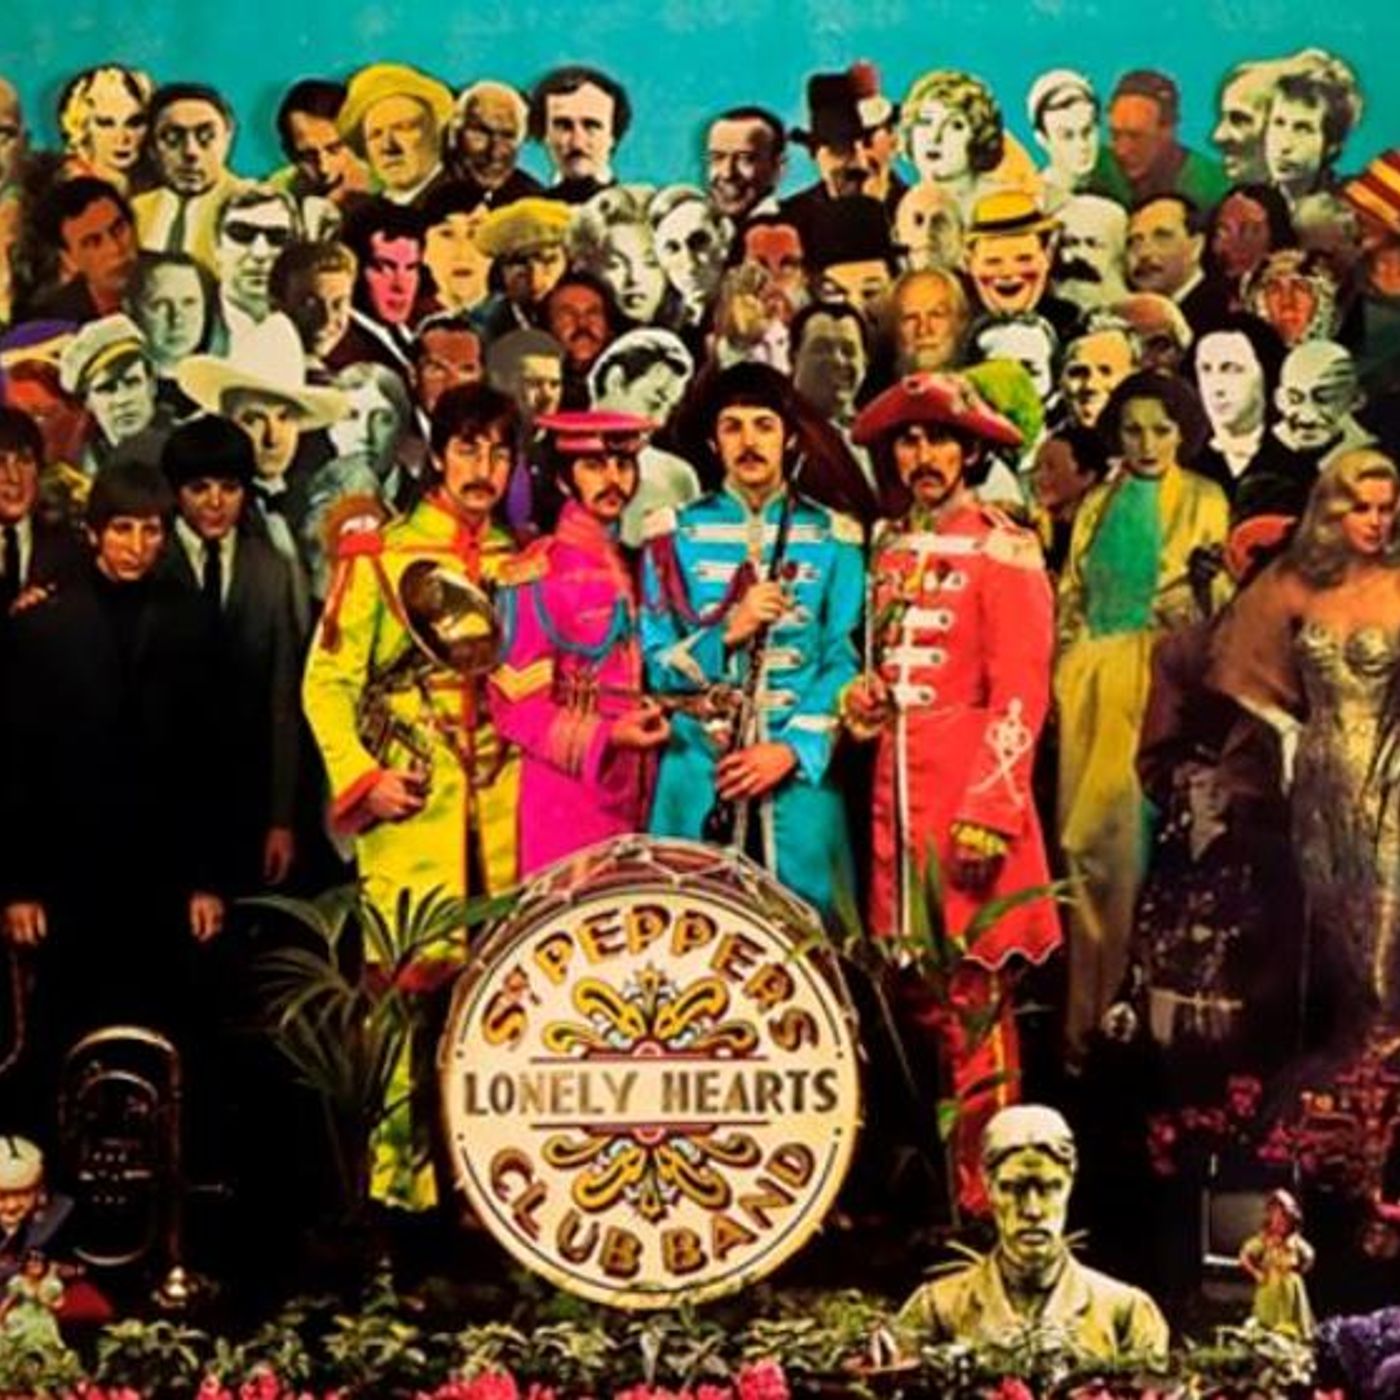 Beatles sgt peppers lonely hearts club. Sgt Pepper's Lonely Hearts Club Band. Битлз Sgt Pepper s Lonely Hearts Club Band. The Beatles Sgt. Pepper's Lonely Hearts Club Band 1967. Sgt. Pepper’s Lonely Hearts Club Band альбом.